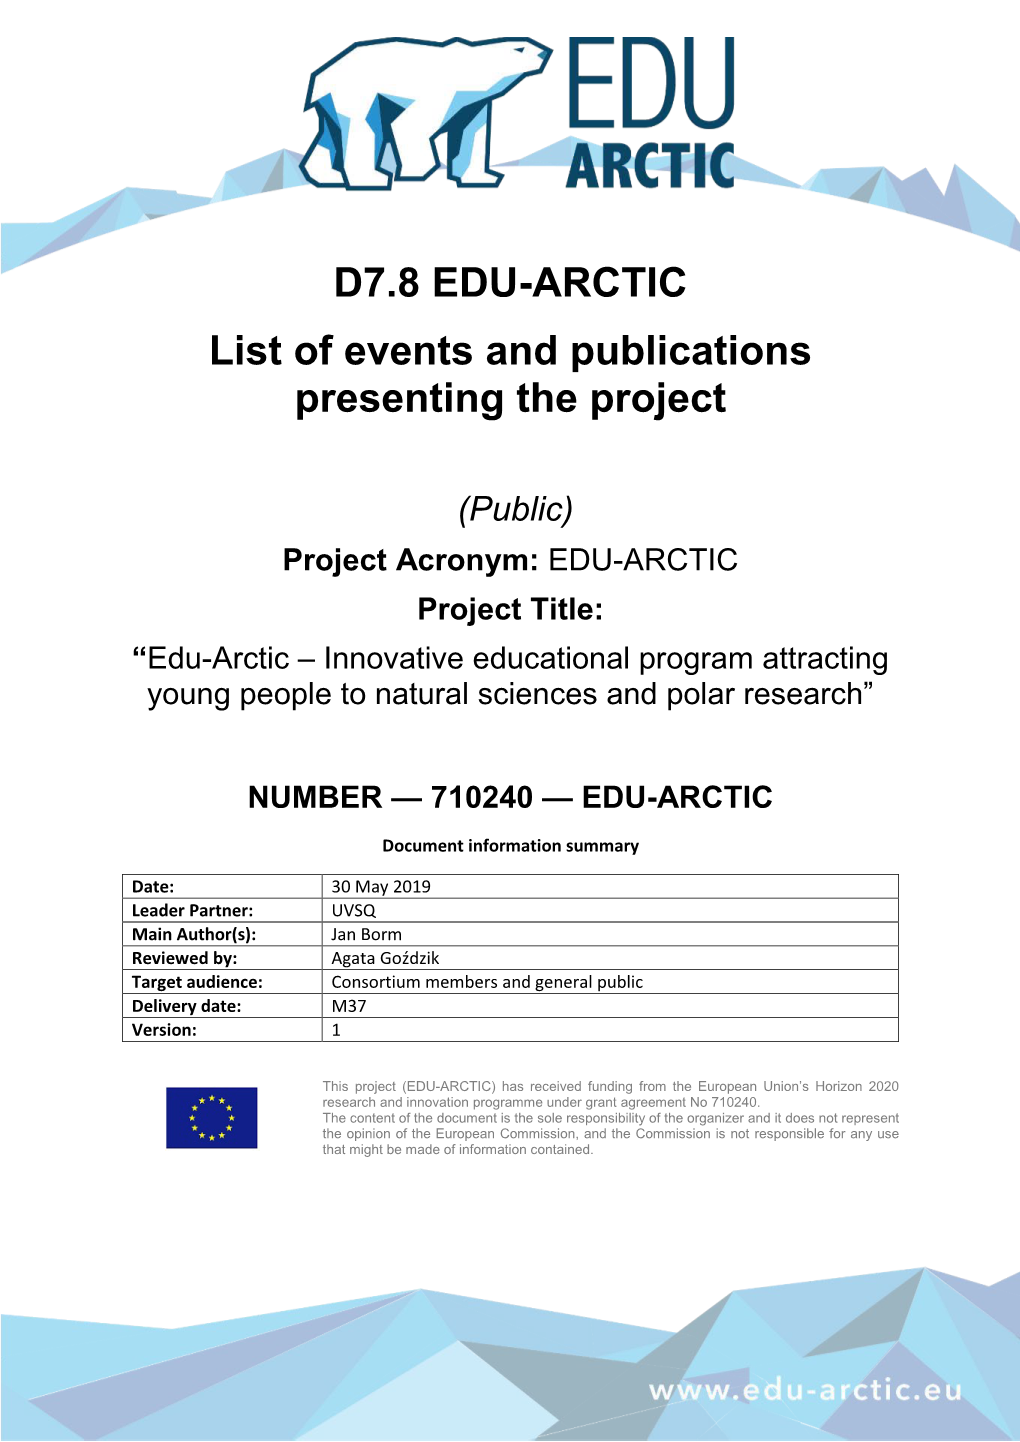 D7.8 EDU-ARCTIC List of Events and Publications Presenting the Project